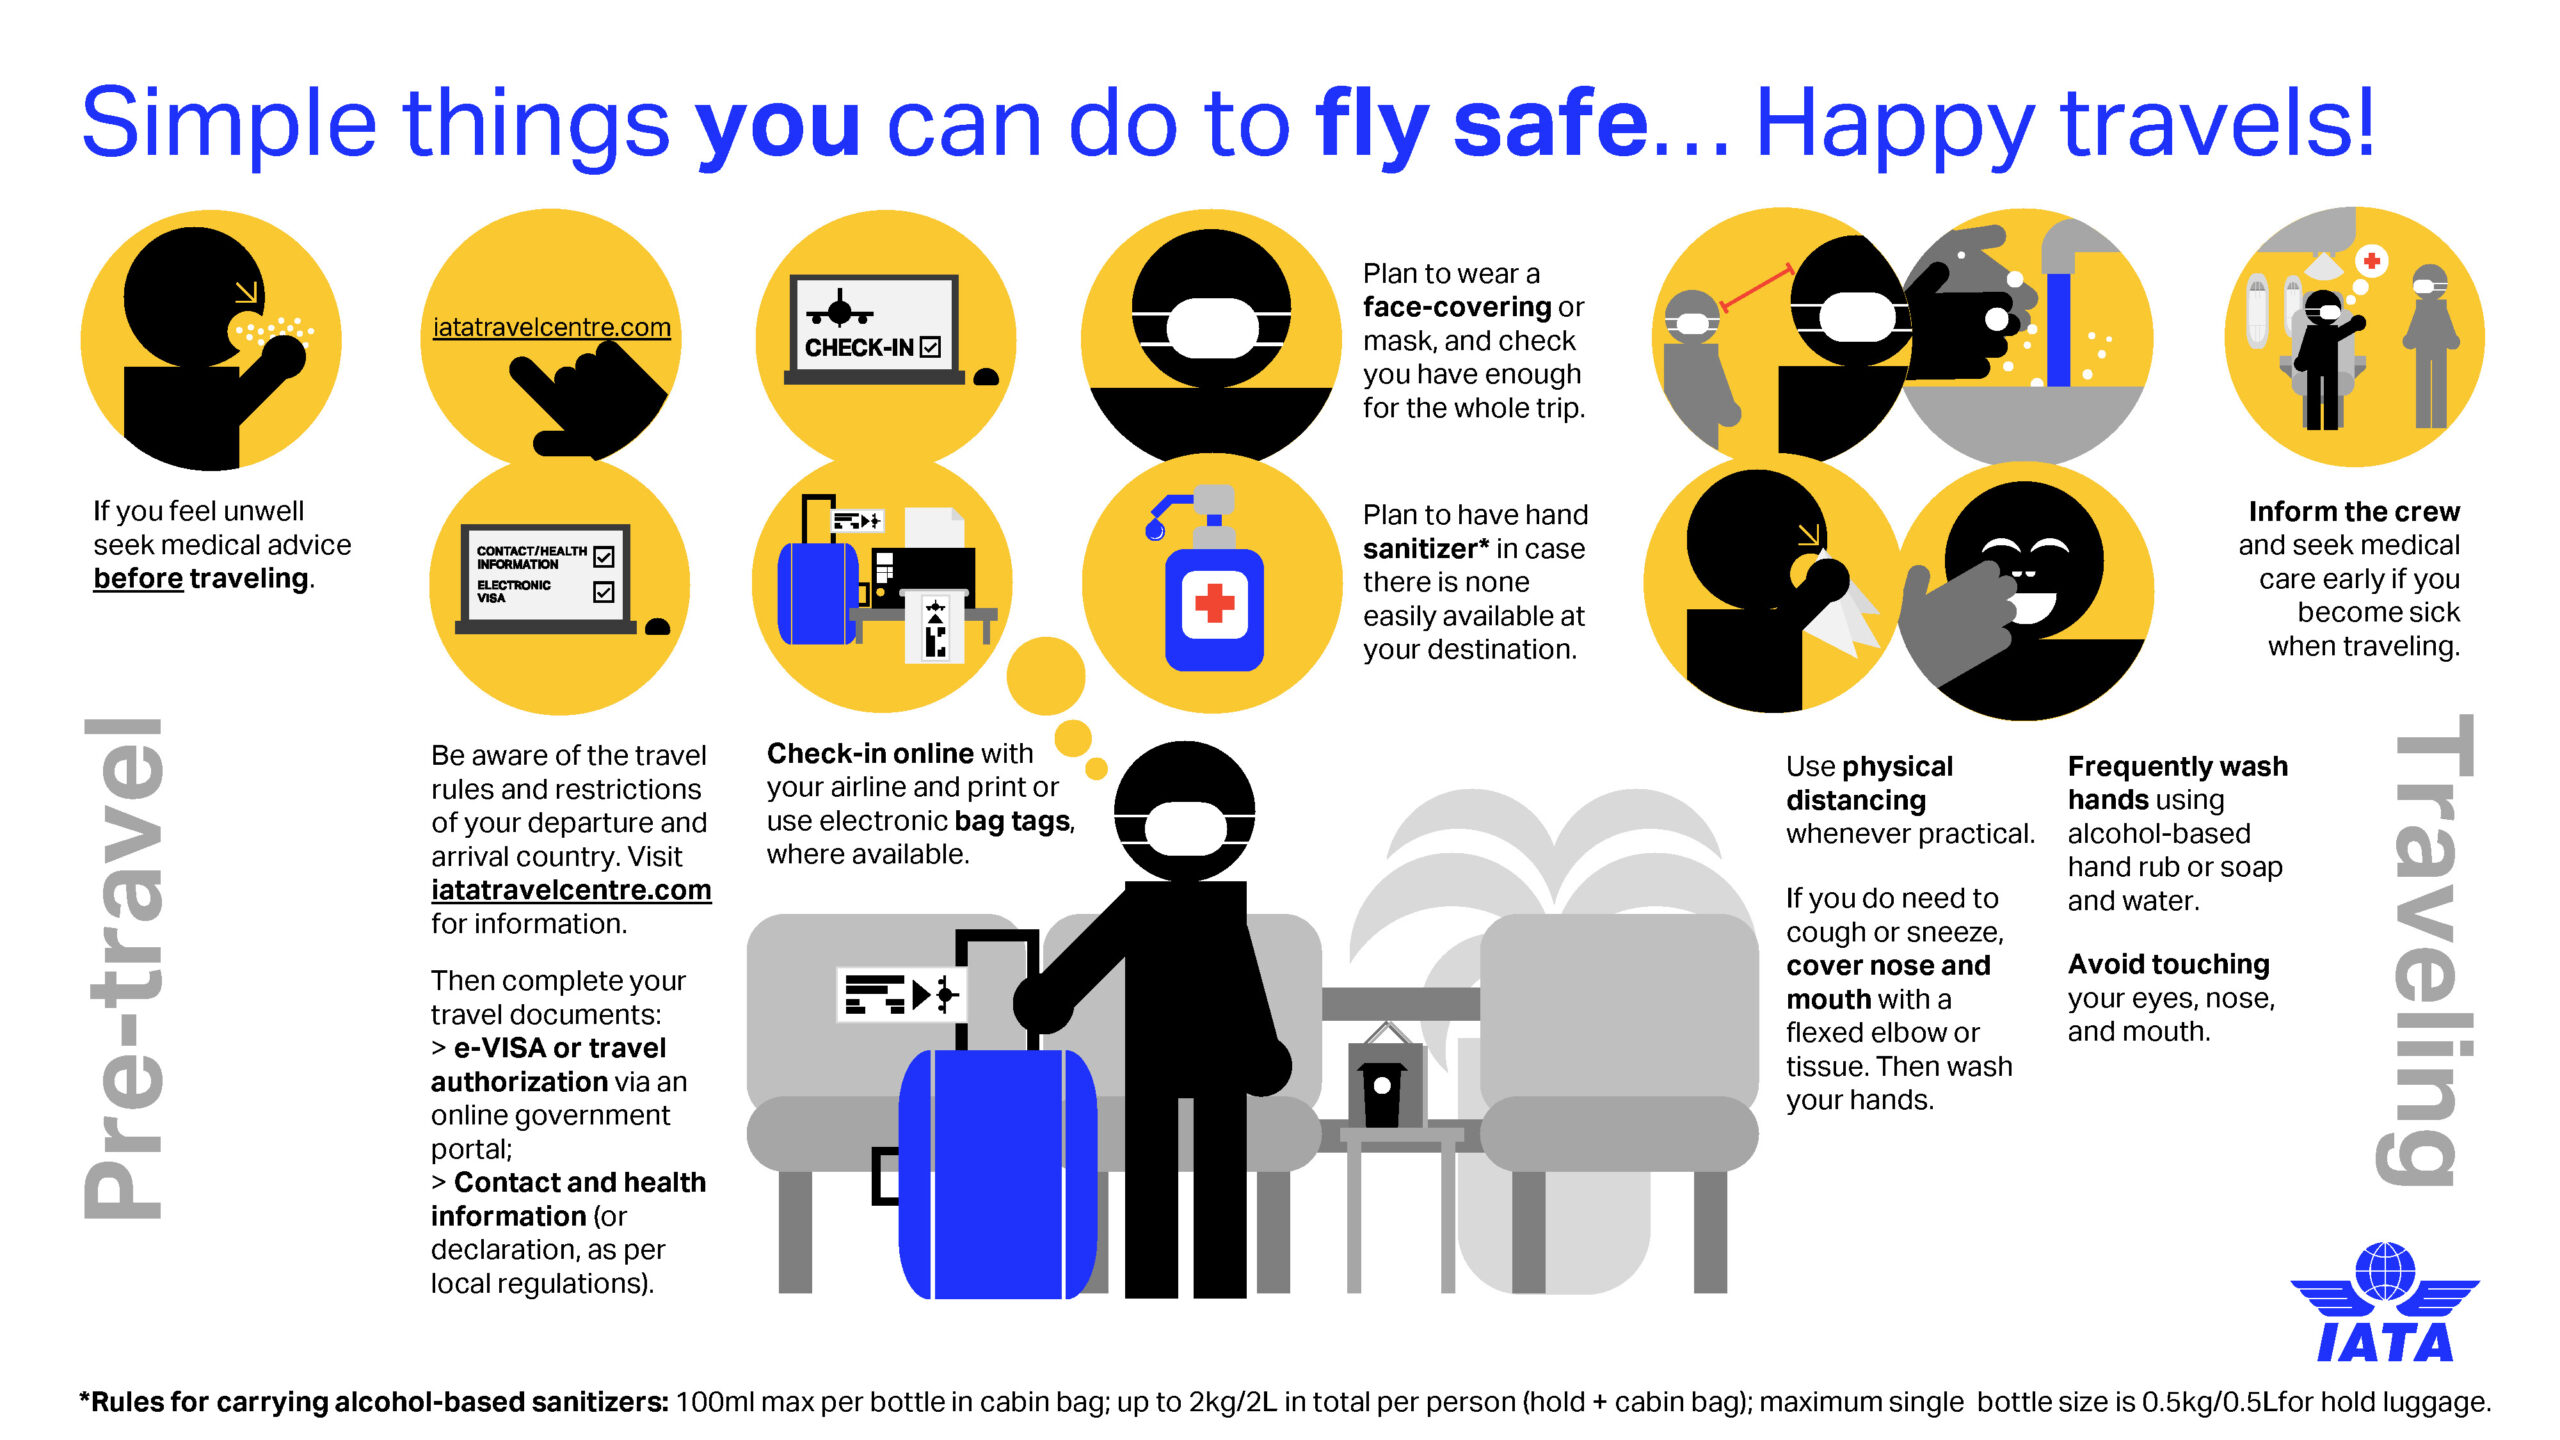 mofa's overseas travel safety information